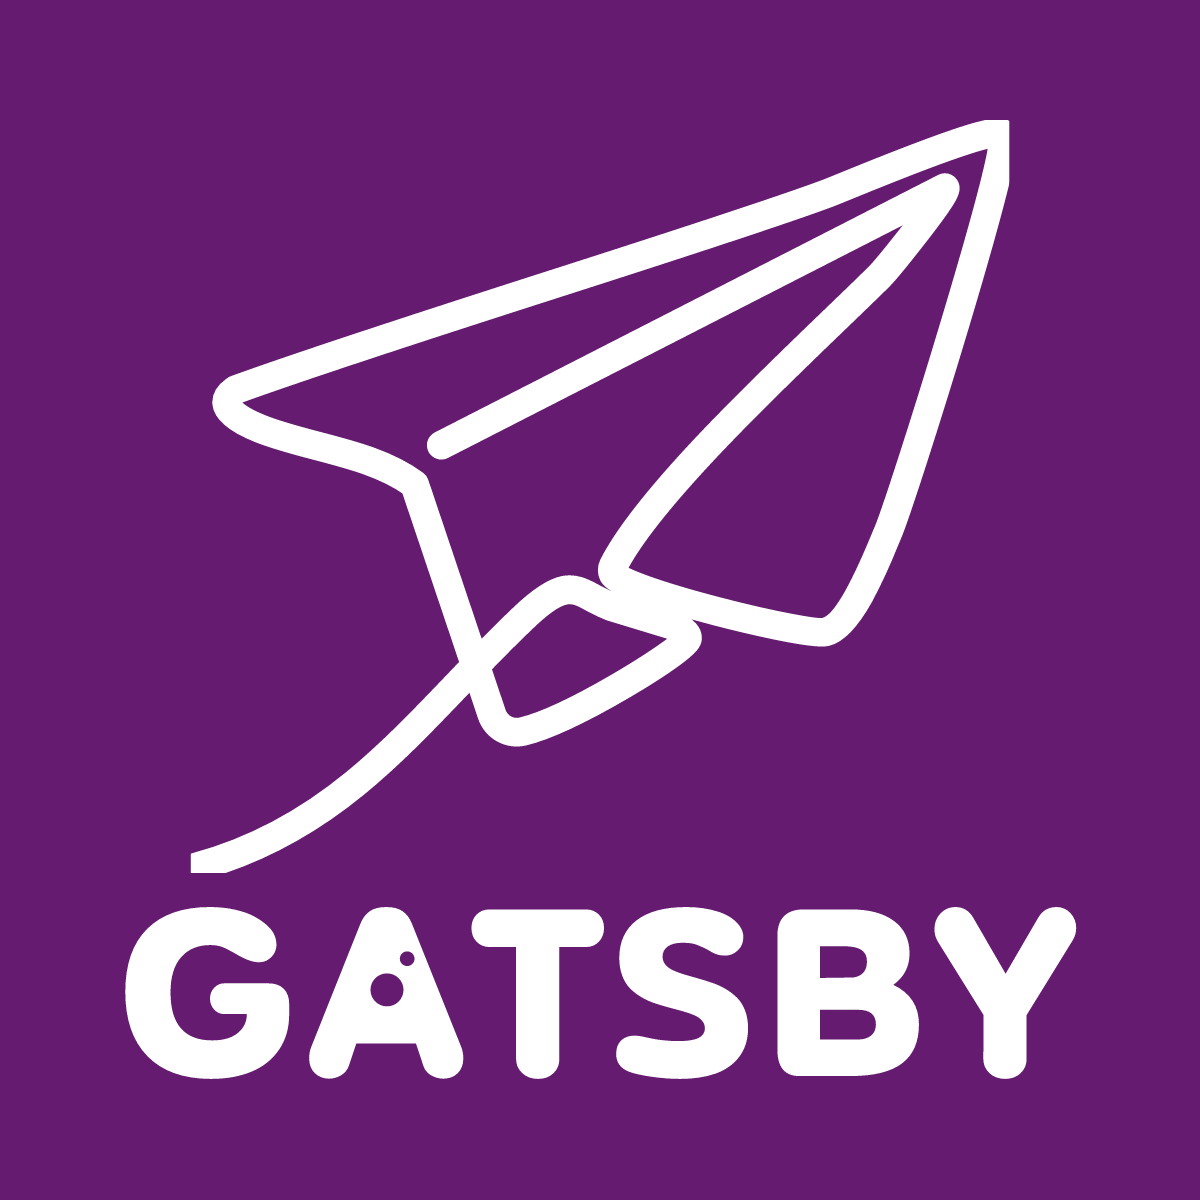 Gatsby: Growth From Community